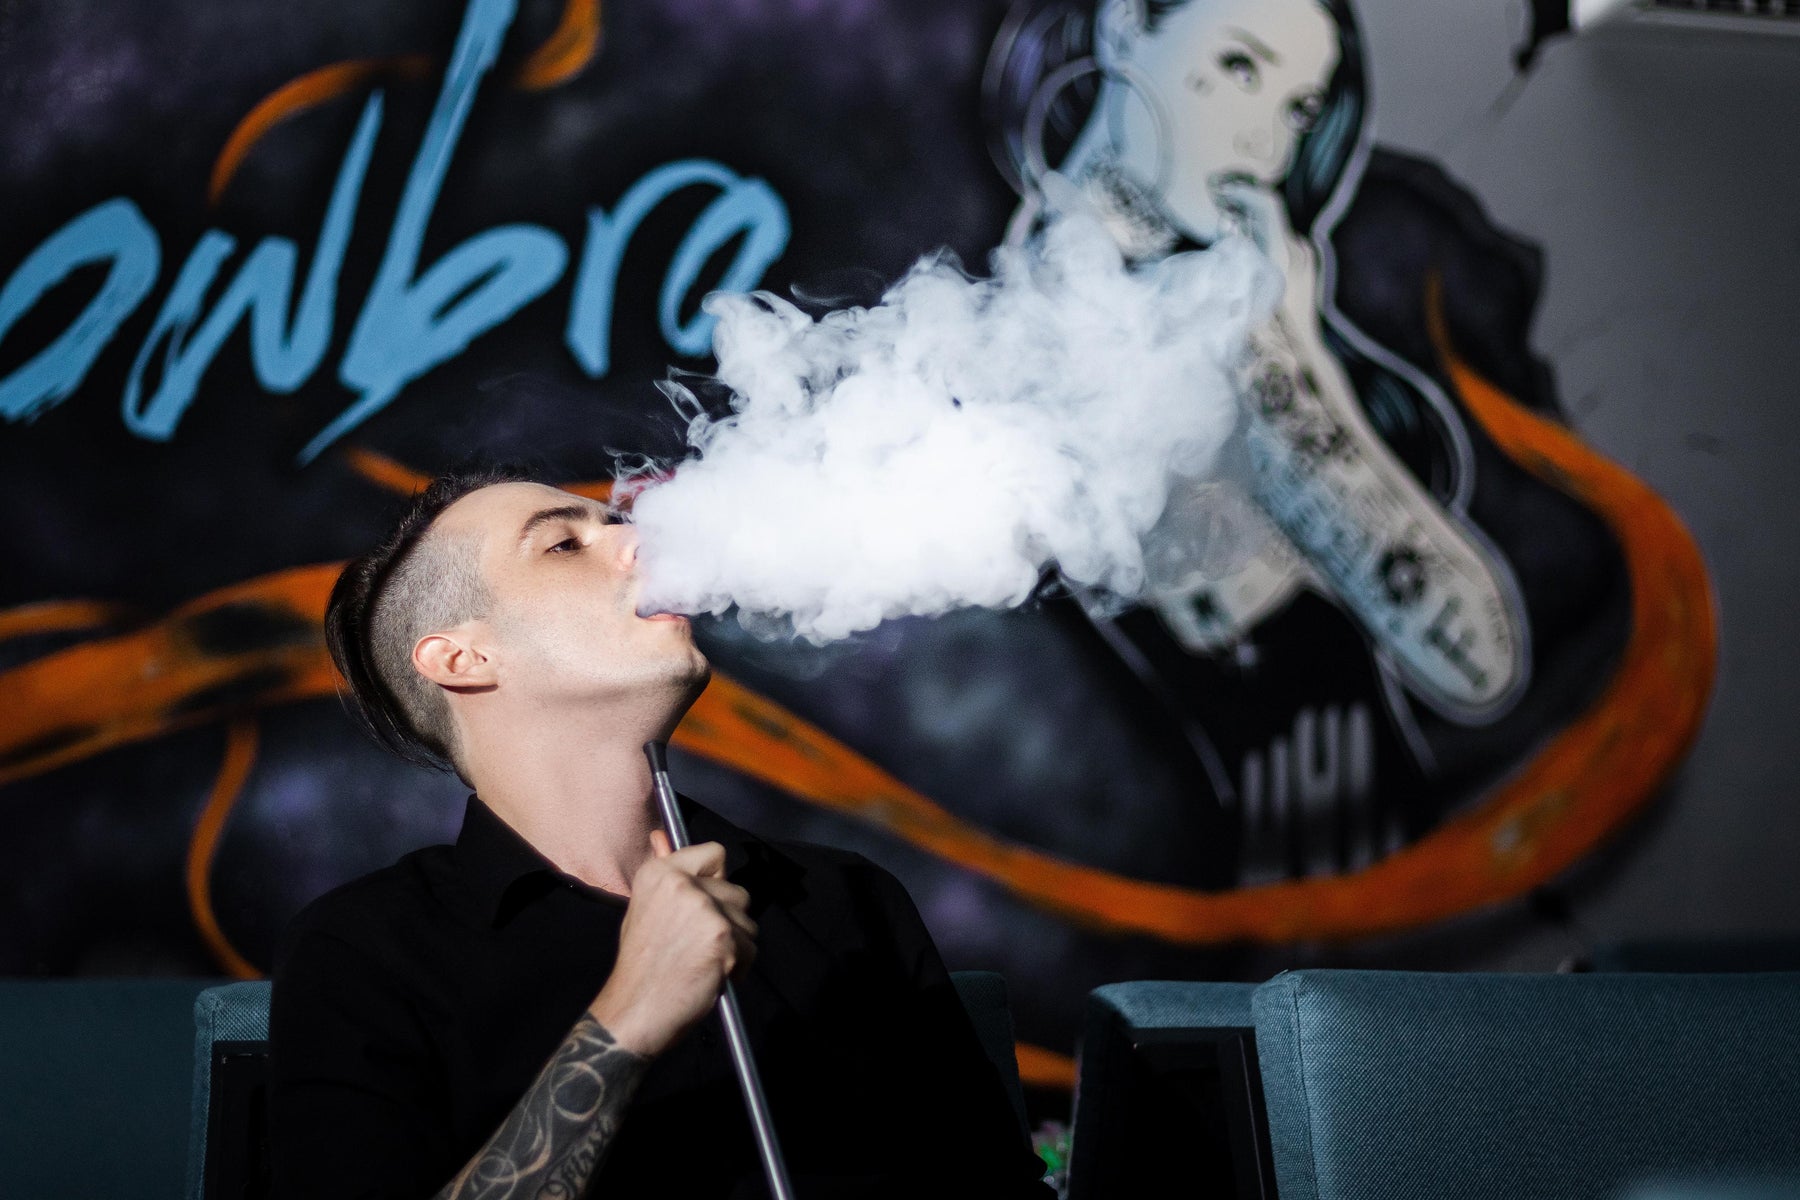 These Are the Reasons You Get a Burnt Taste from Vaping